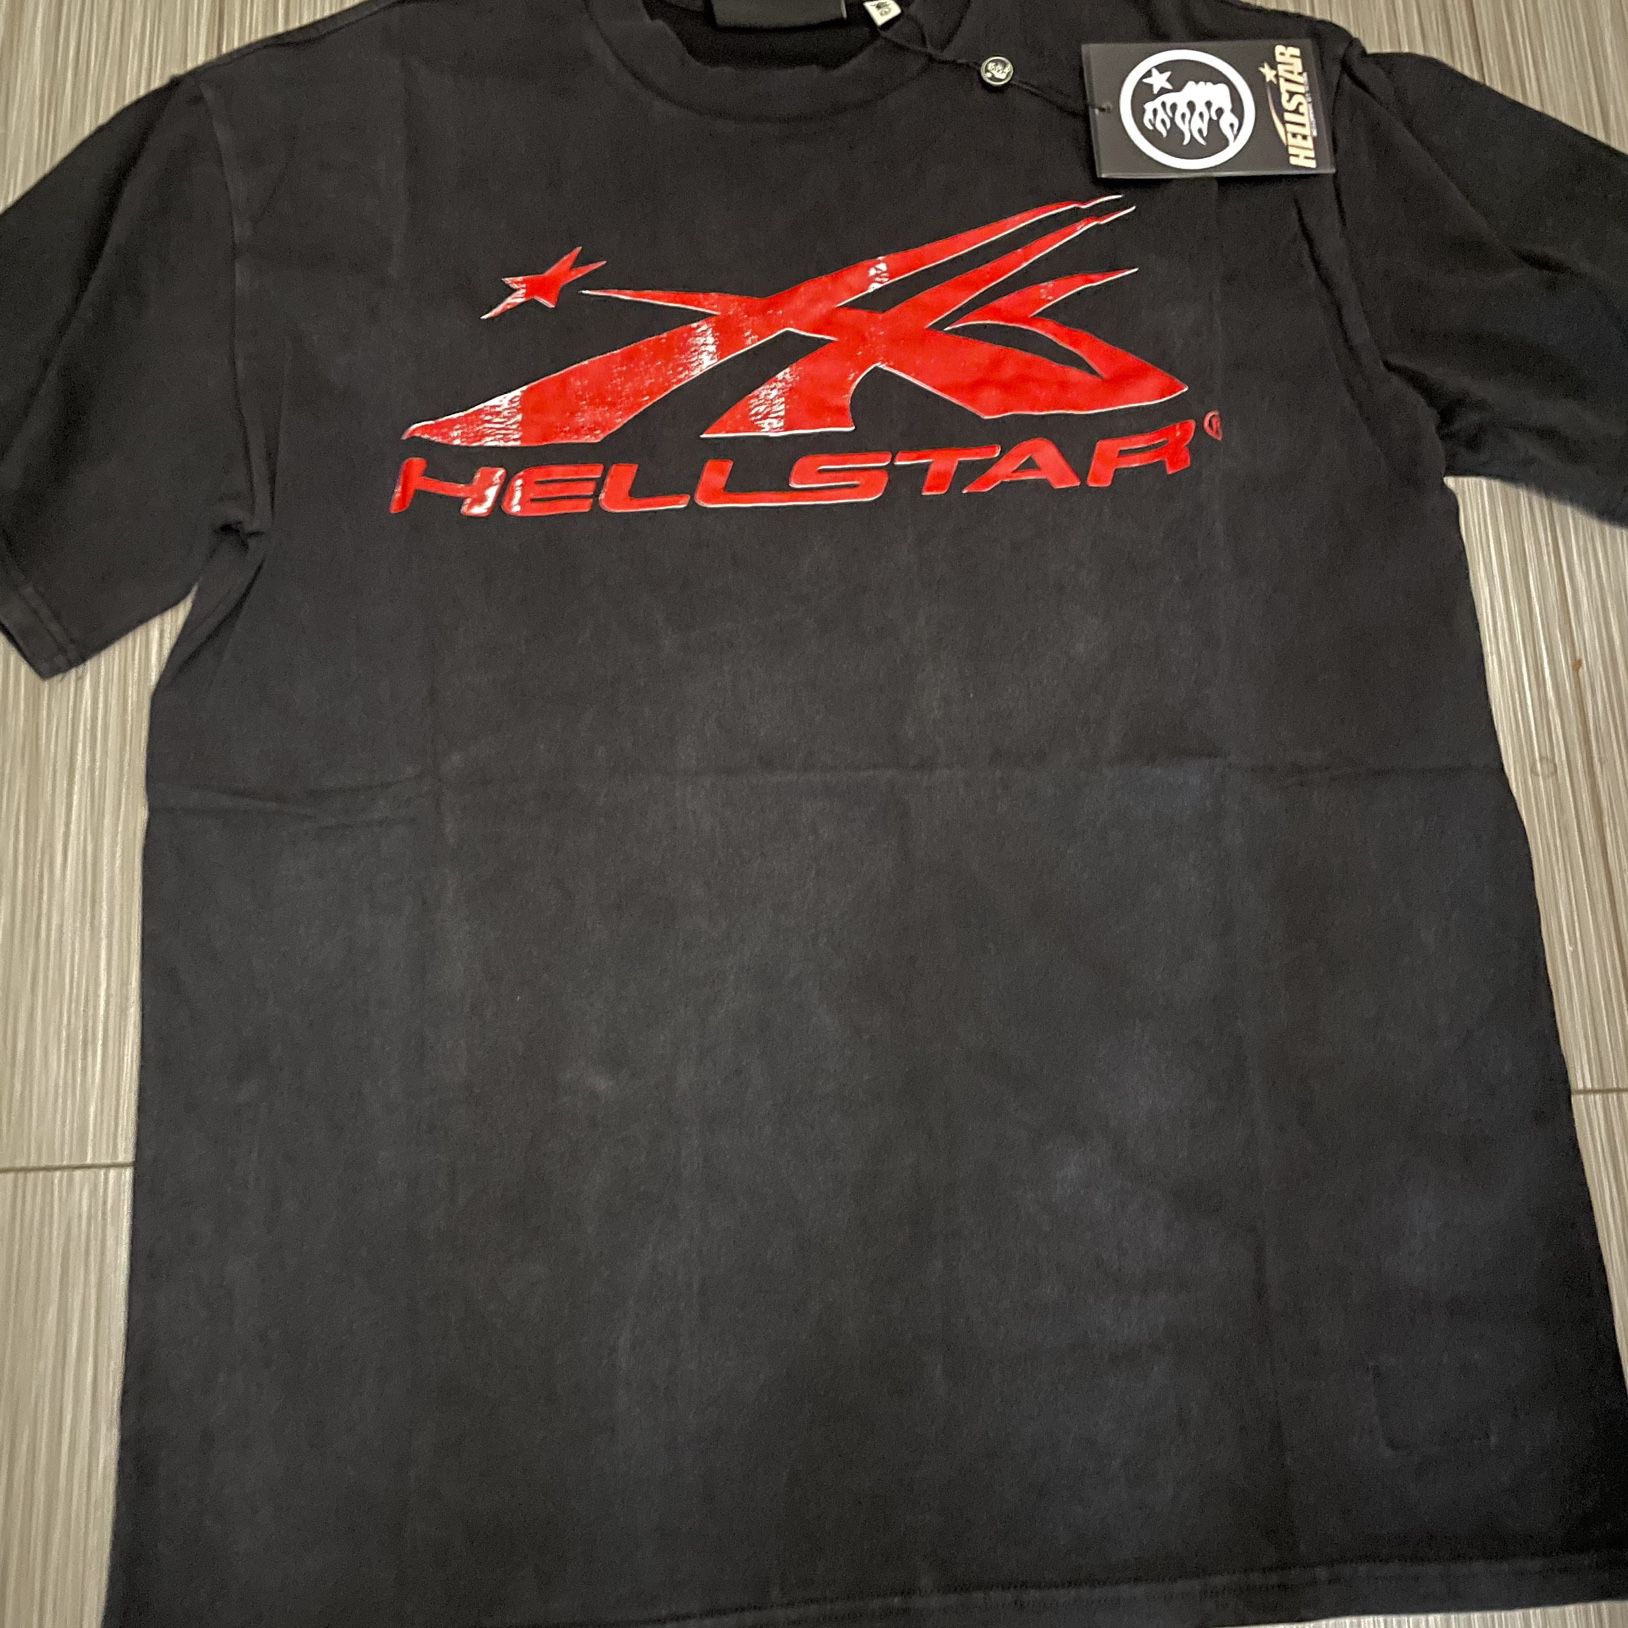 (L) Red Hellstar Tee Bag&Tags Included 